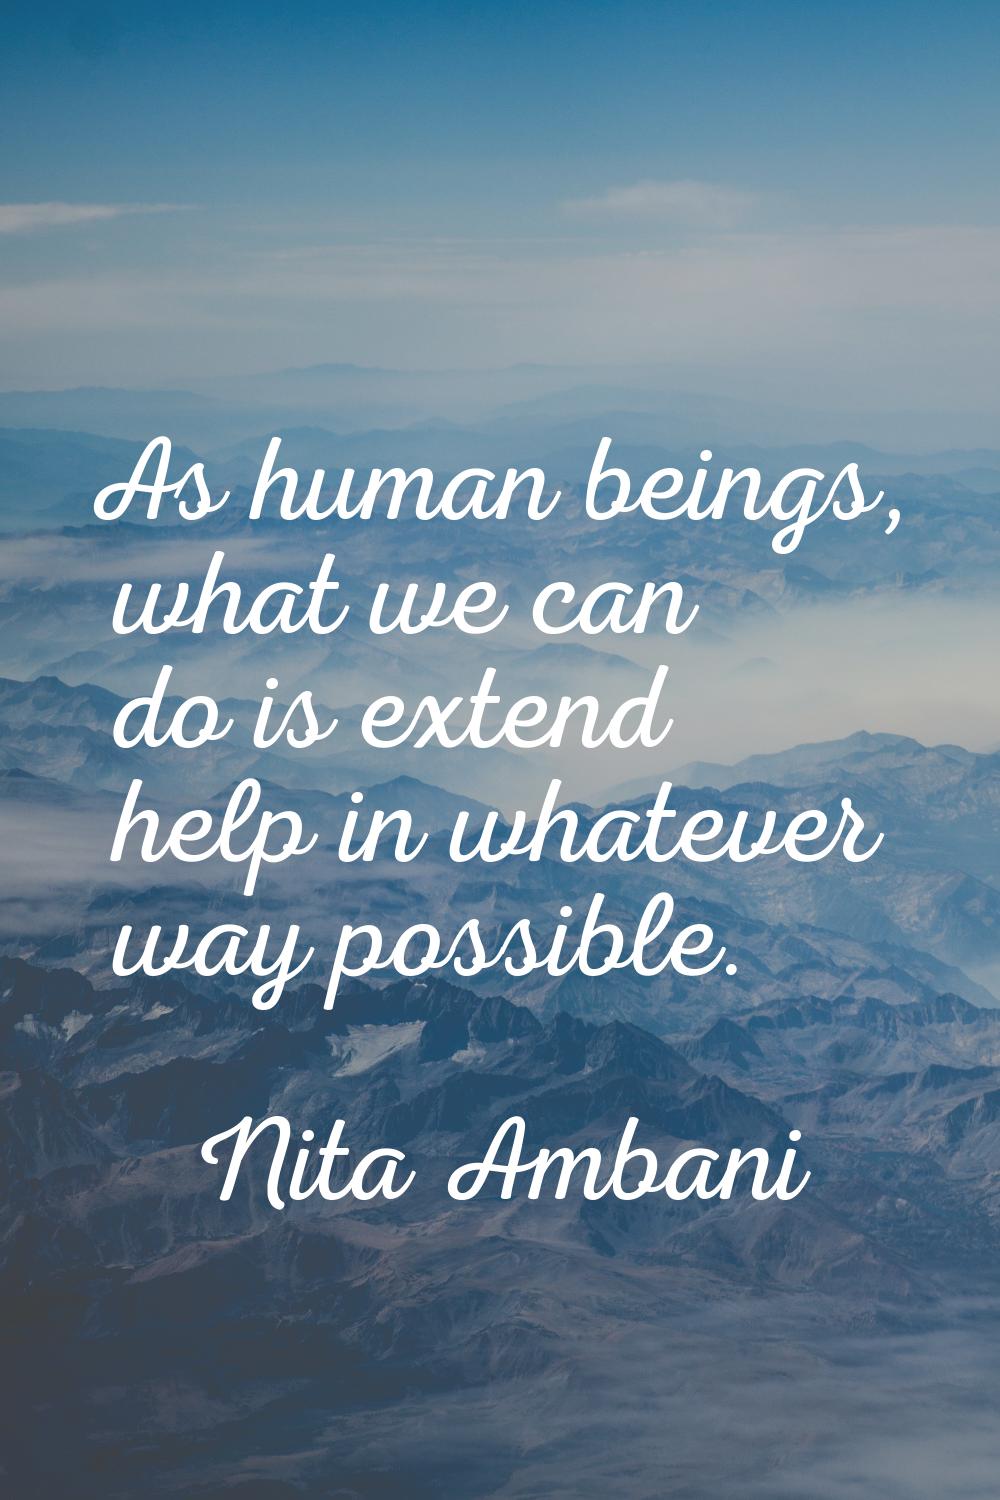 As human beings, what we can do is extend help in whatever way possible.